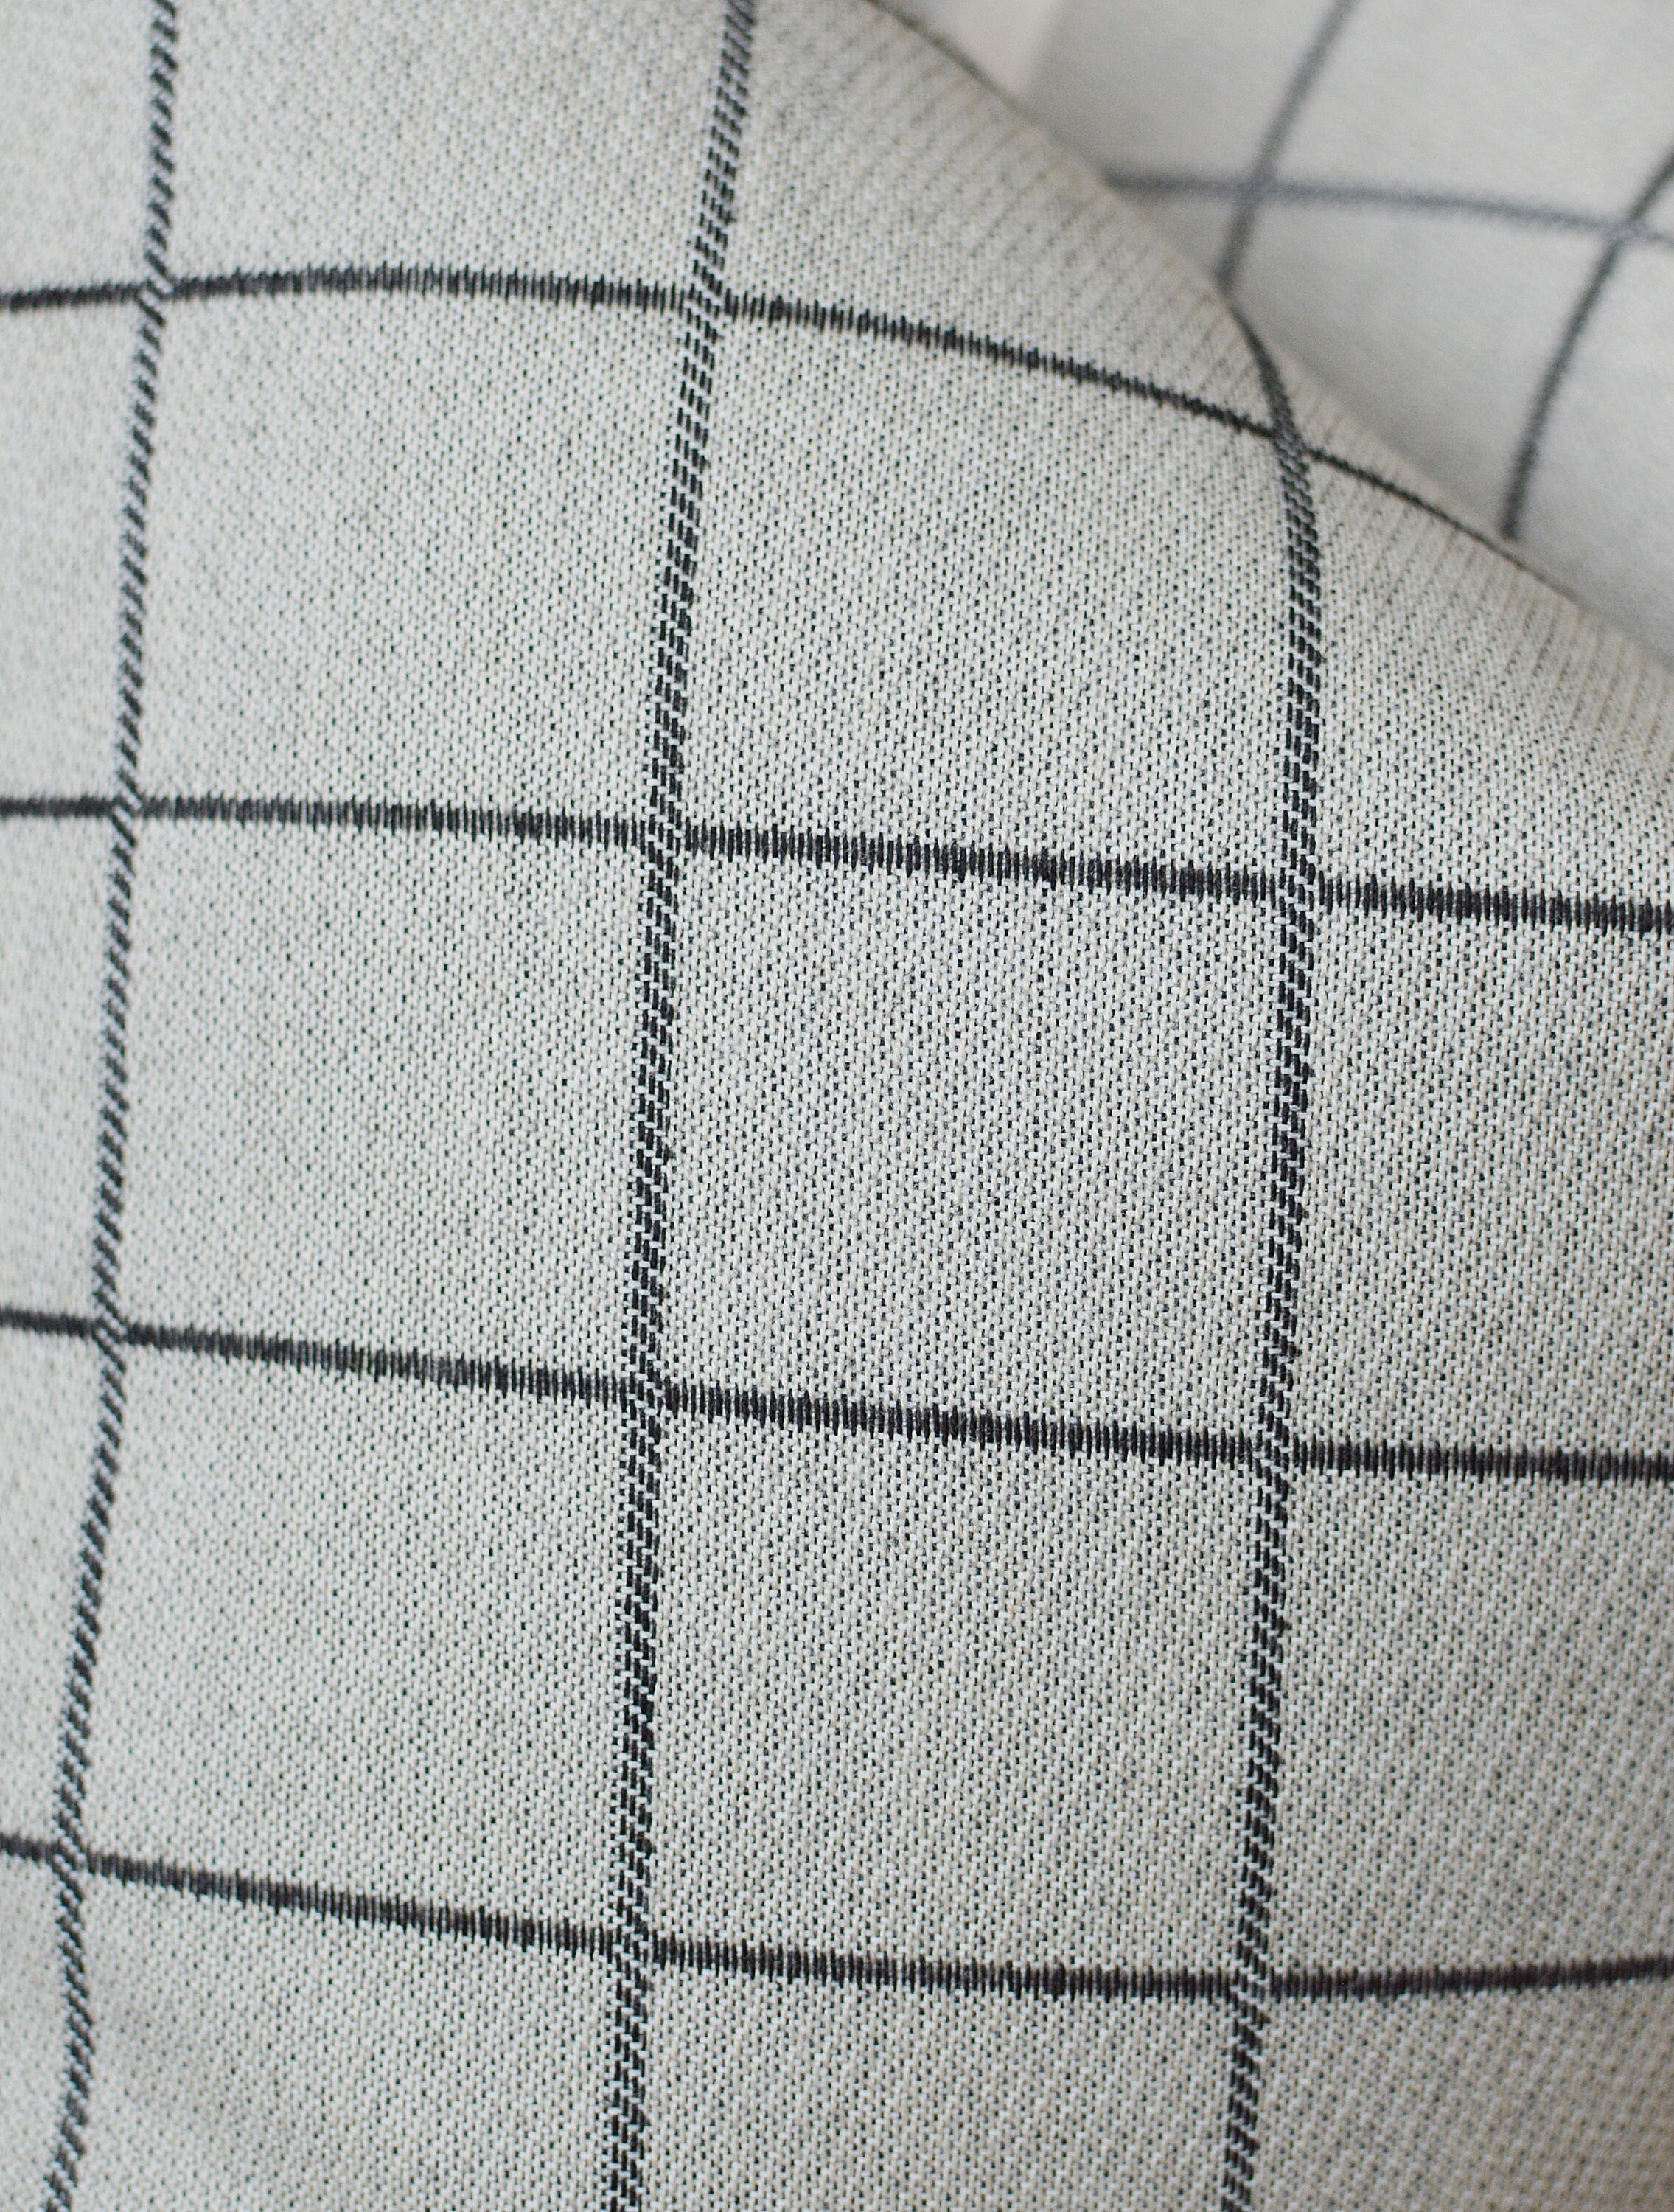 Black and Gray Windowpane Pillow Cover - Etsy